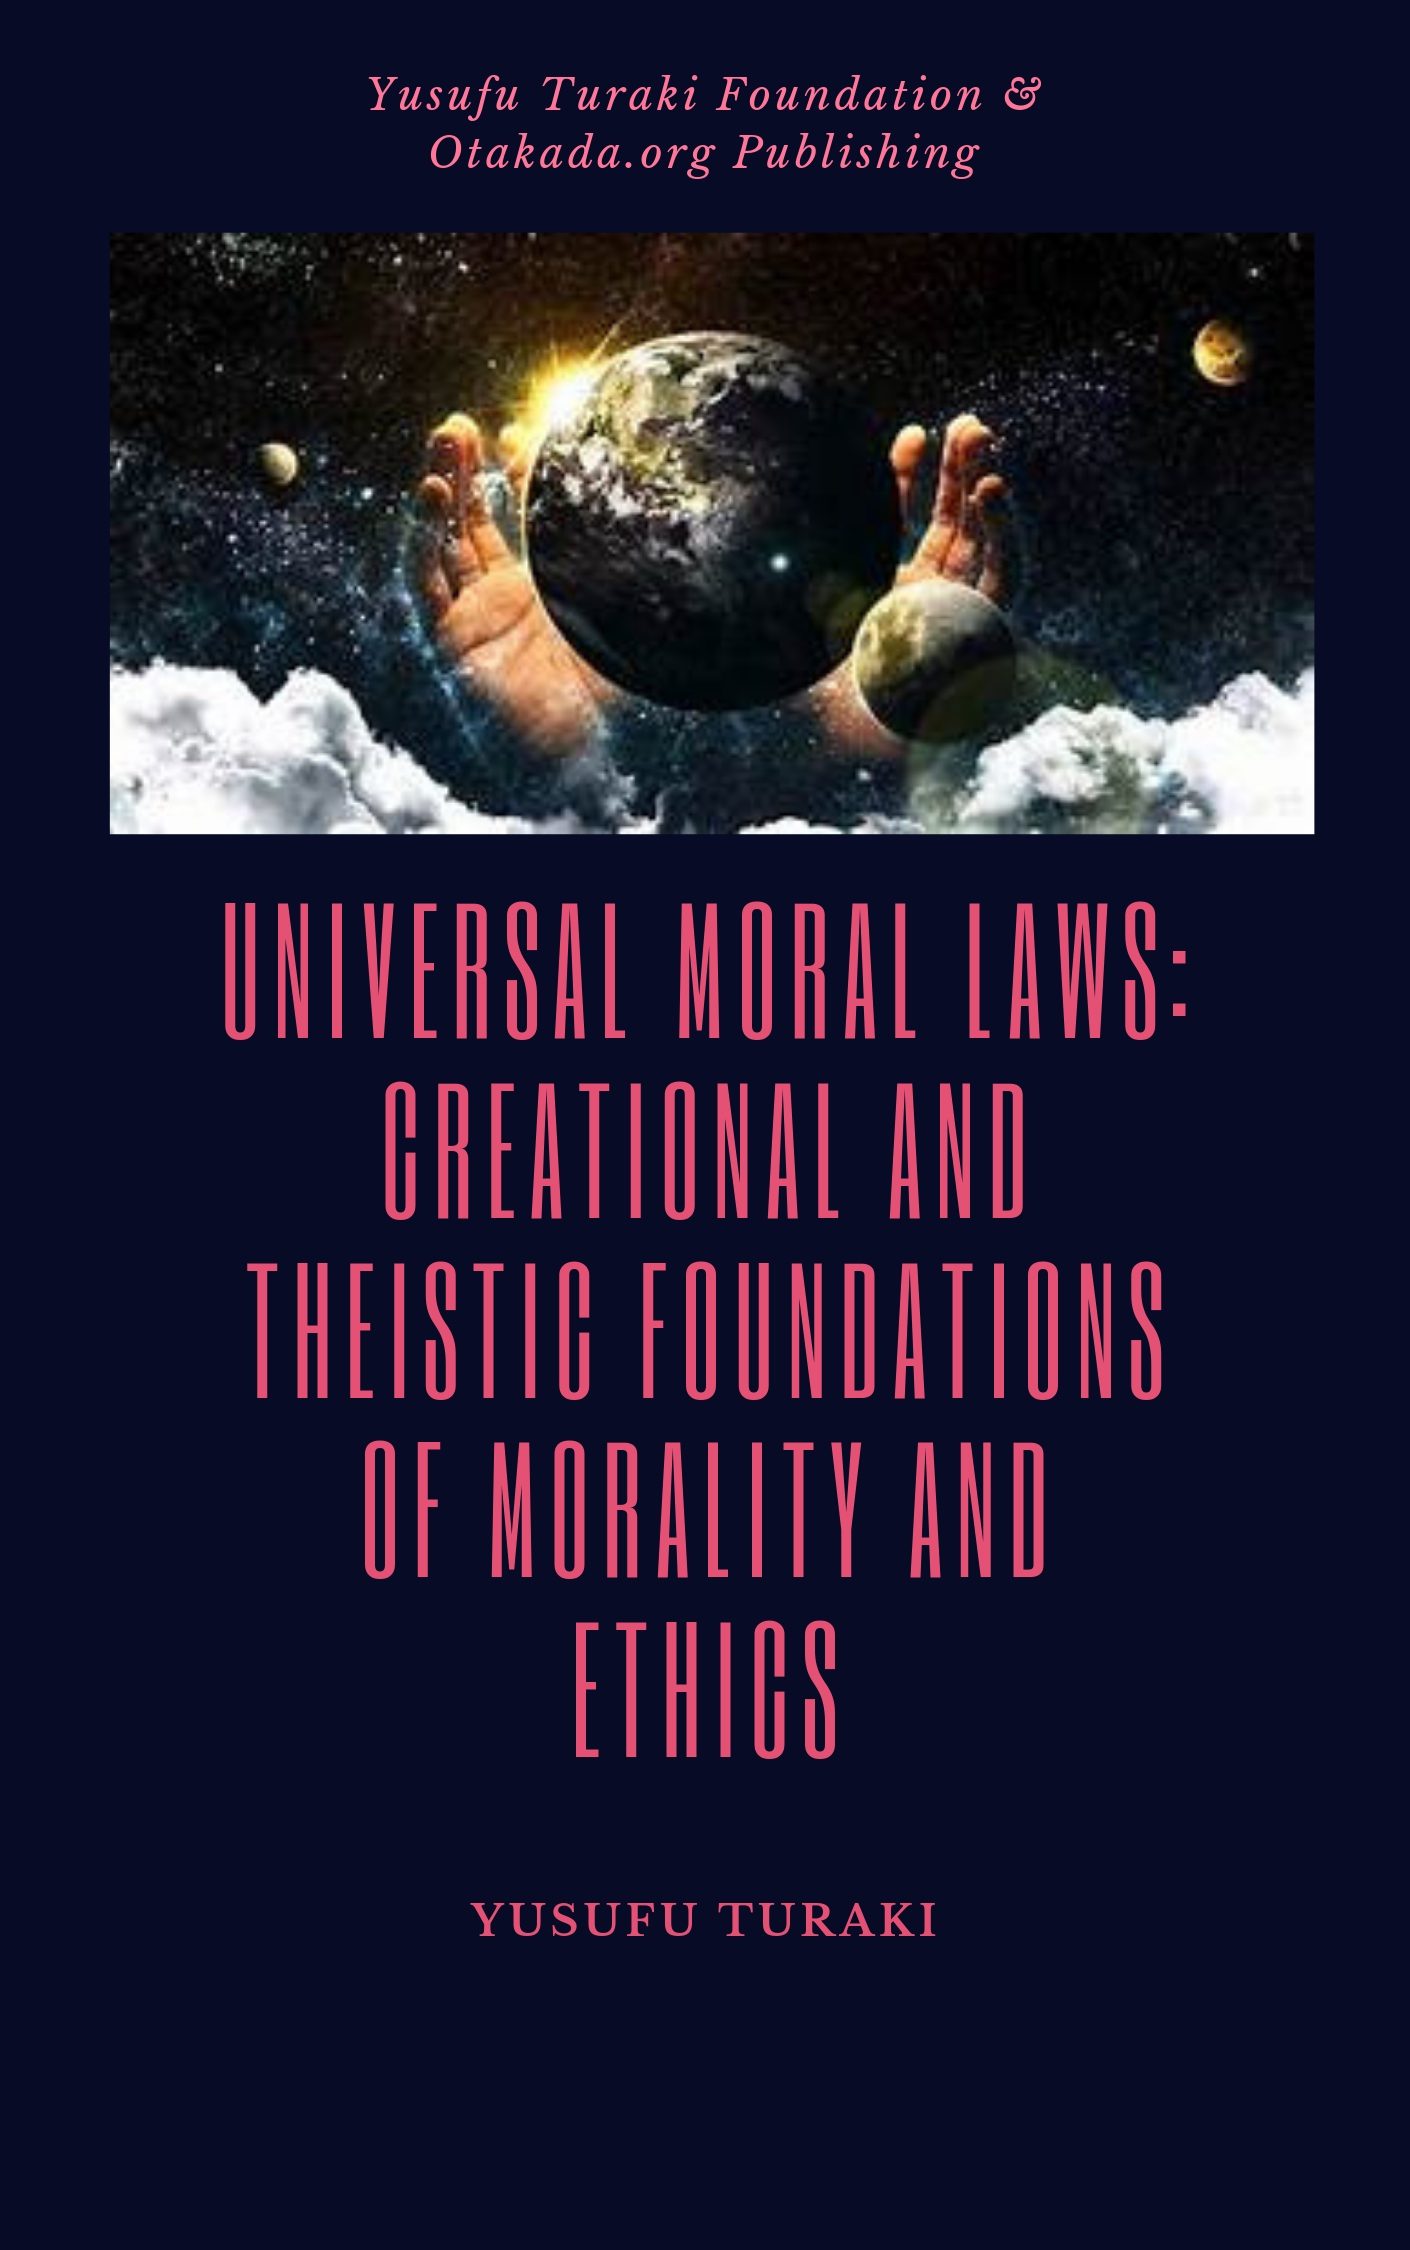 Universal Moral Laws Creational And Theistic Foundations of Morality And Ethics